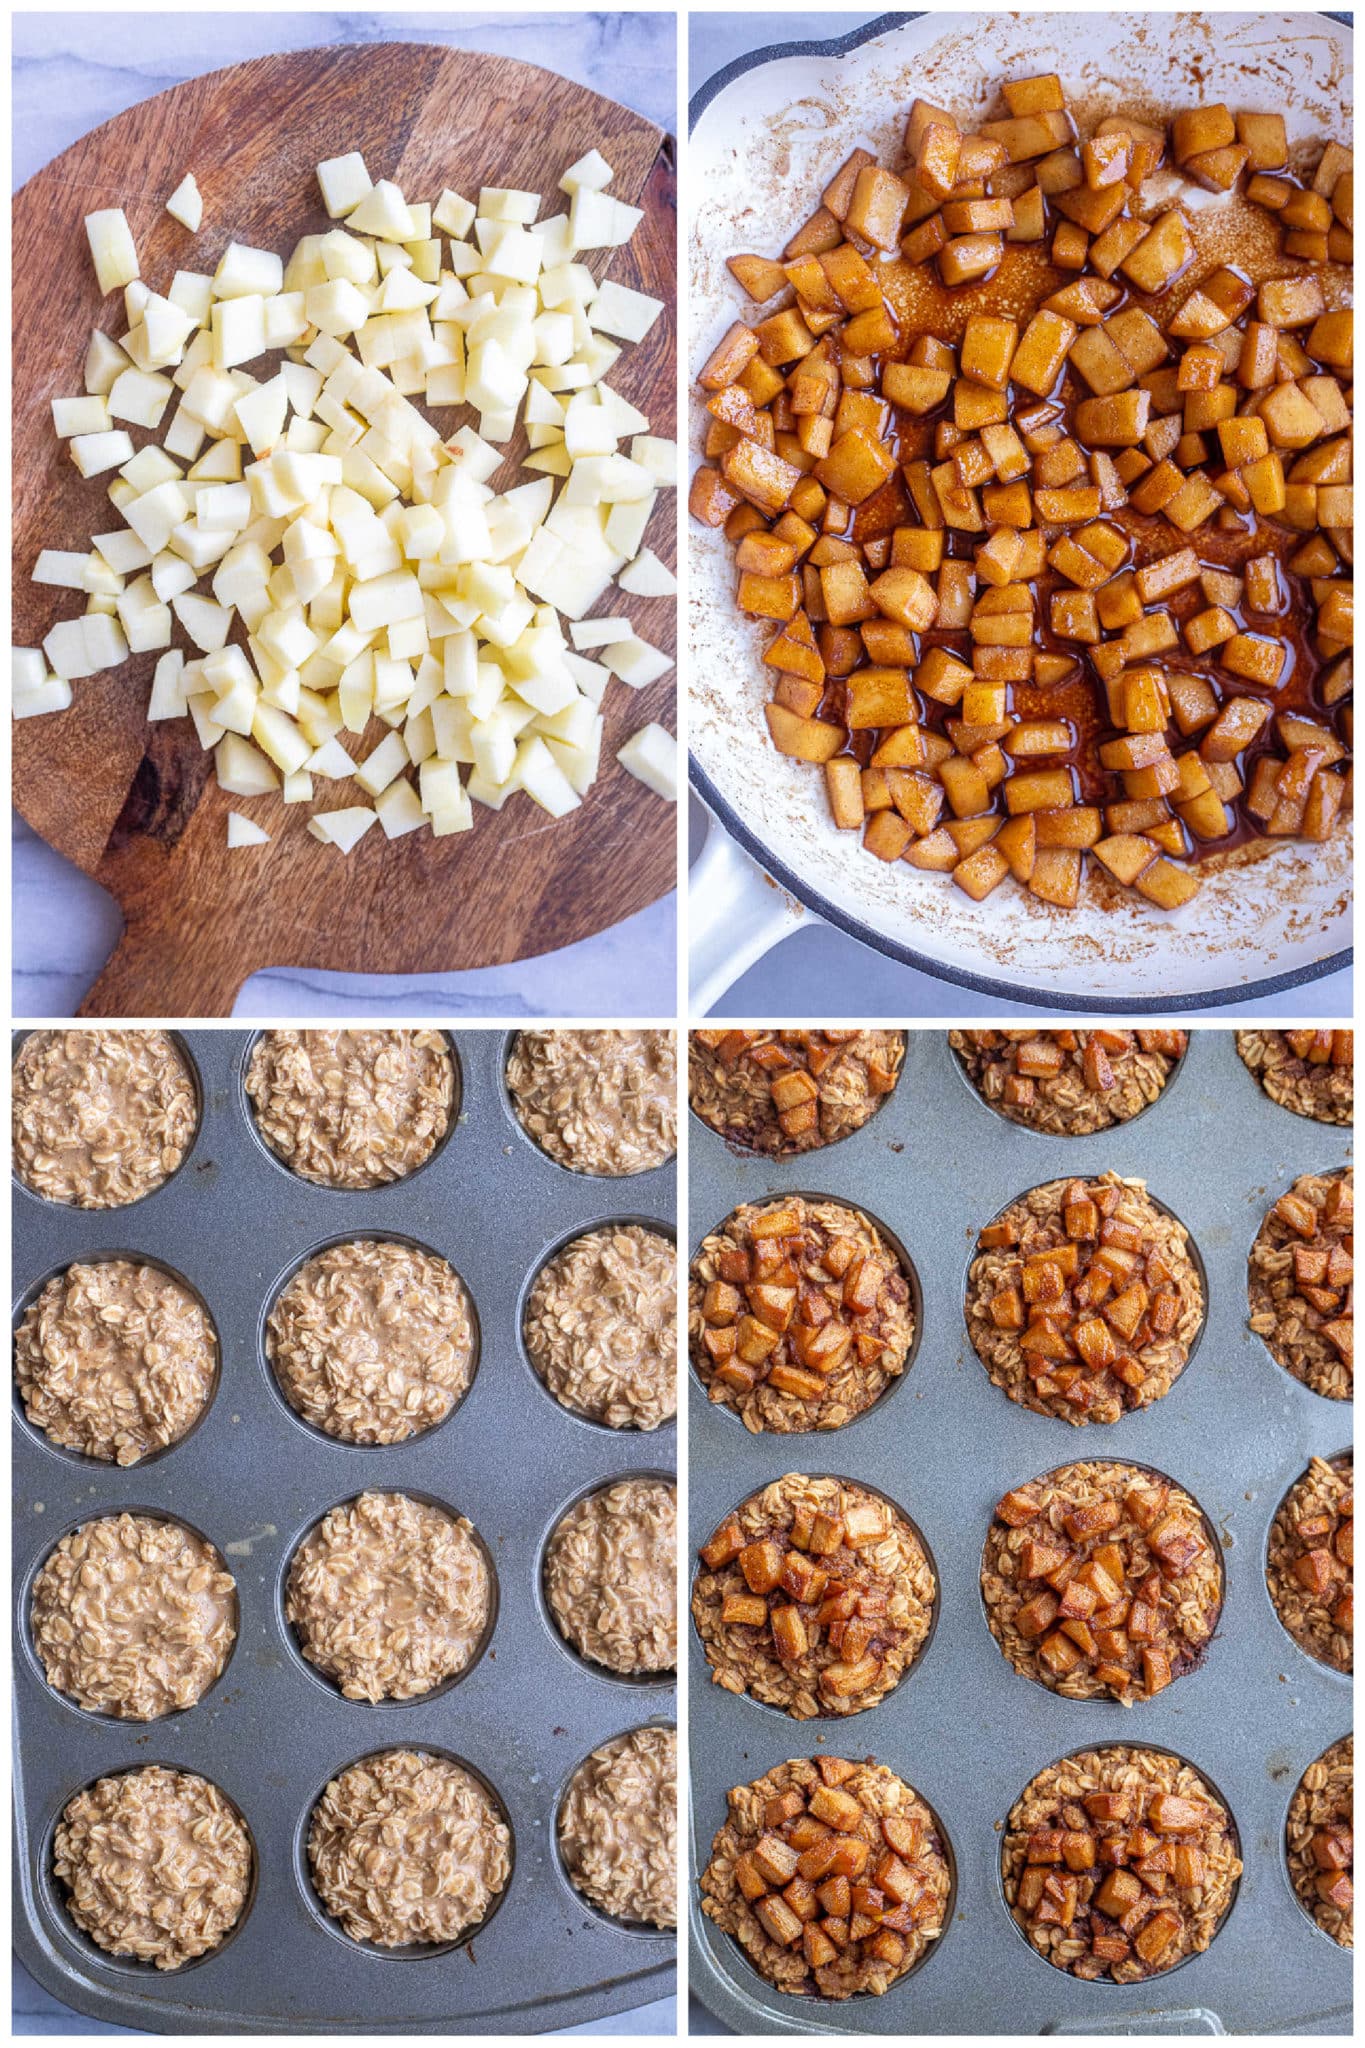 showing how to make caramelized apples and peanut butter baked oatmeal cups